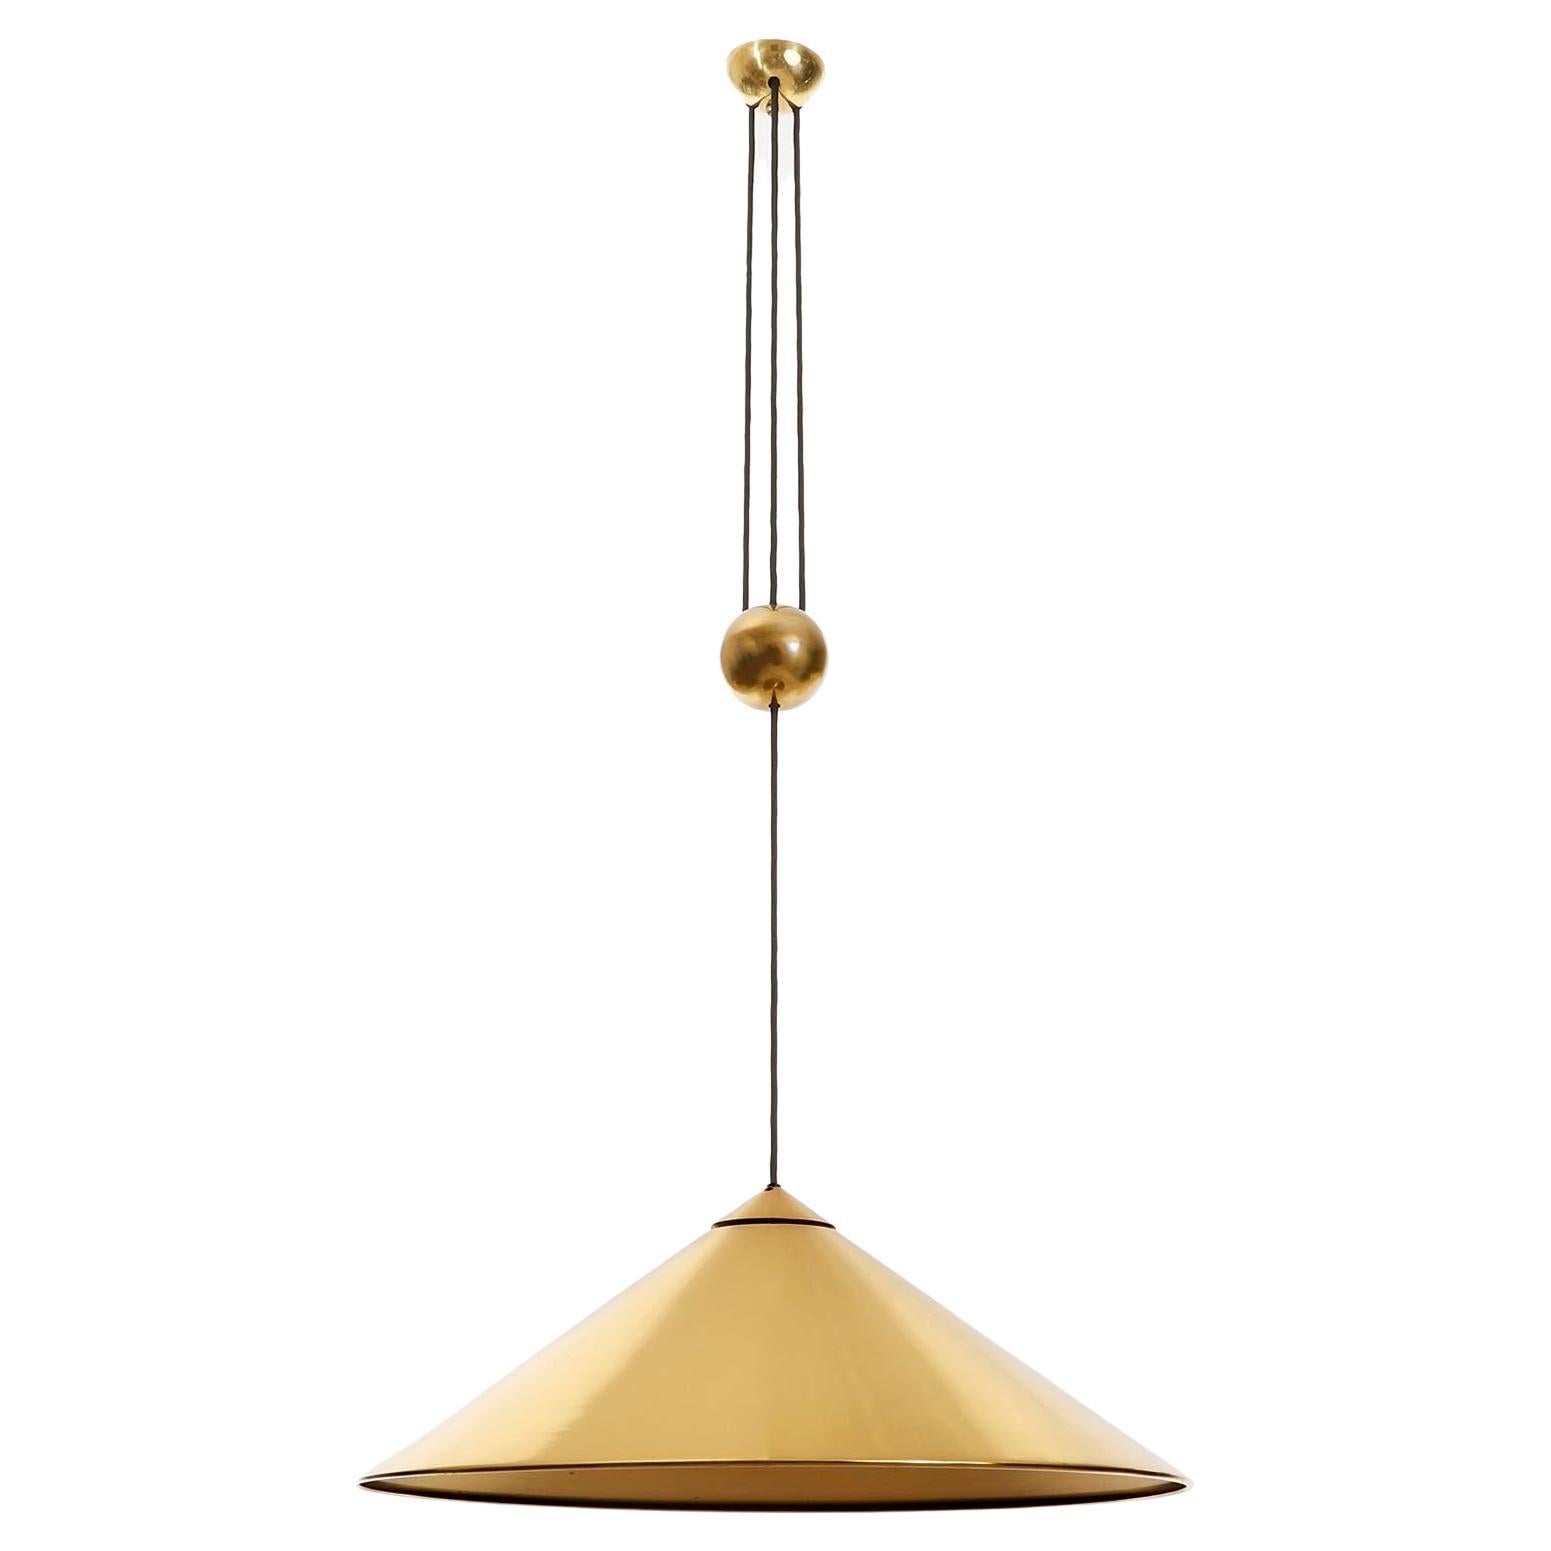 A height adjustable counter weight / balance pendant lamp model 'Keos' by Florian Schulz, Germany, manufactured in midcentury, circa 1970 (late 1960s-early 1970s).
The fixture is made of solid brass with a polished and aged surface in a rich and